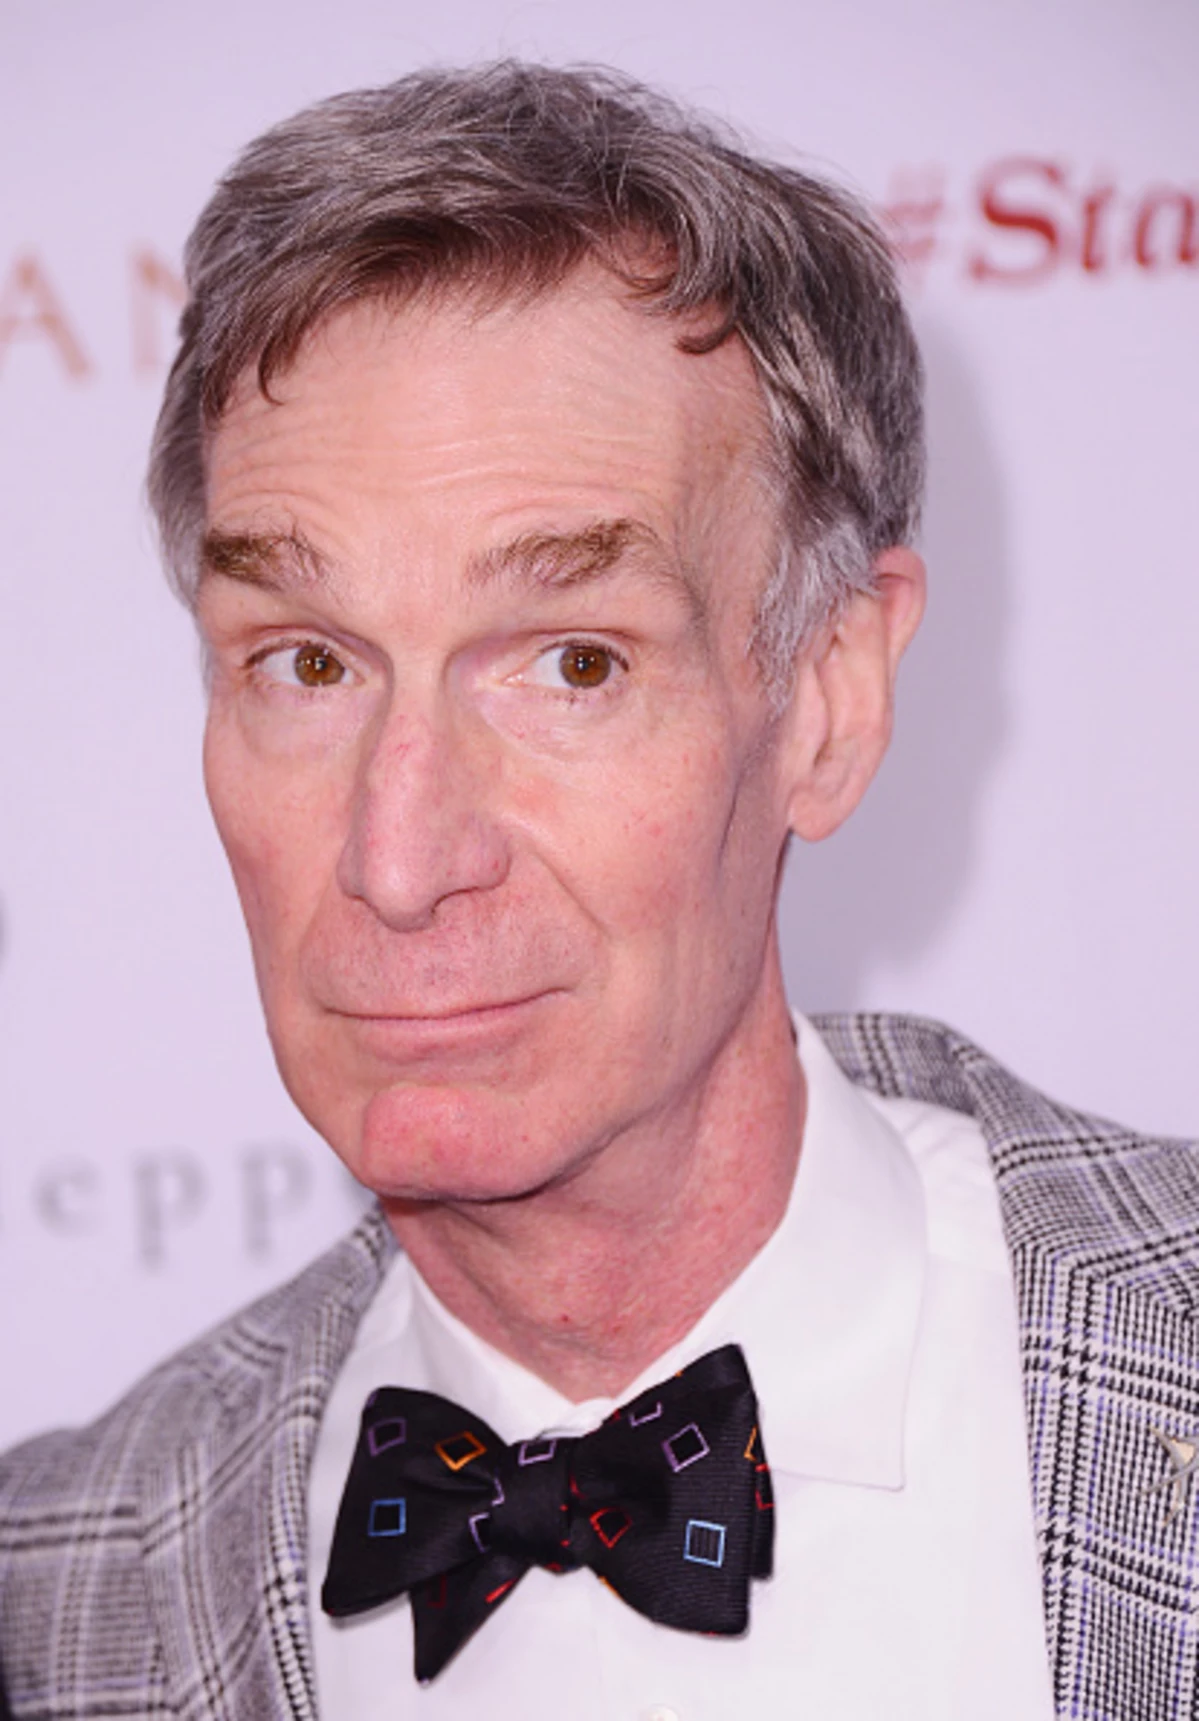 Bill Nye the Science Guy to Visit Capital District